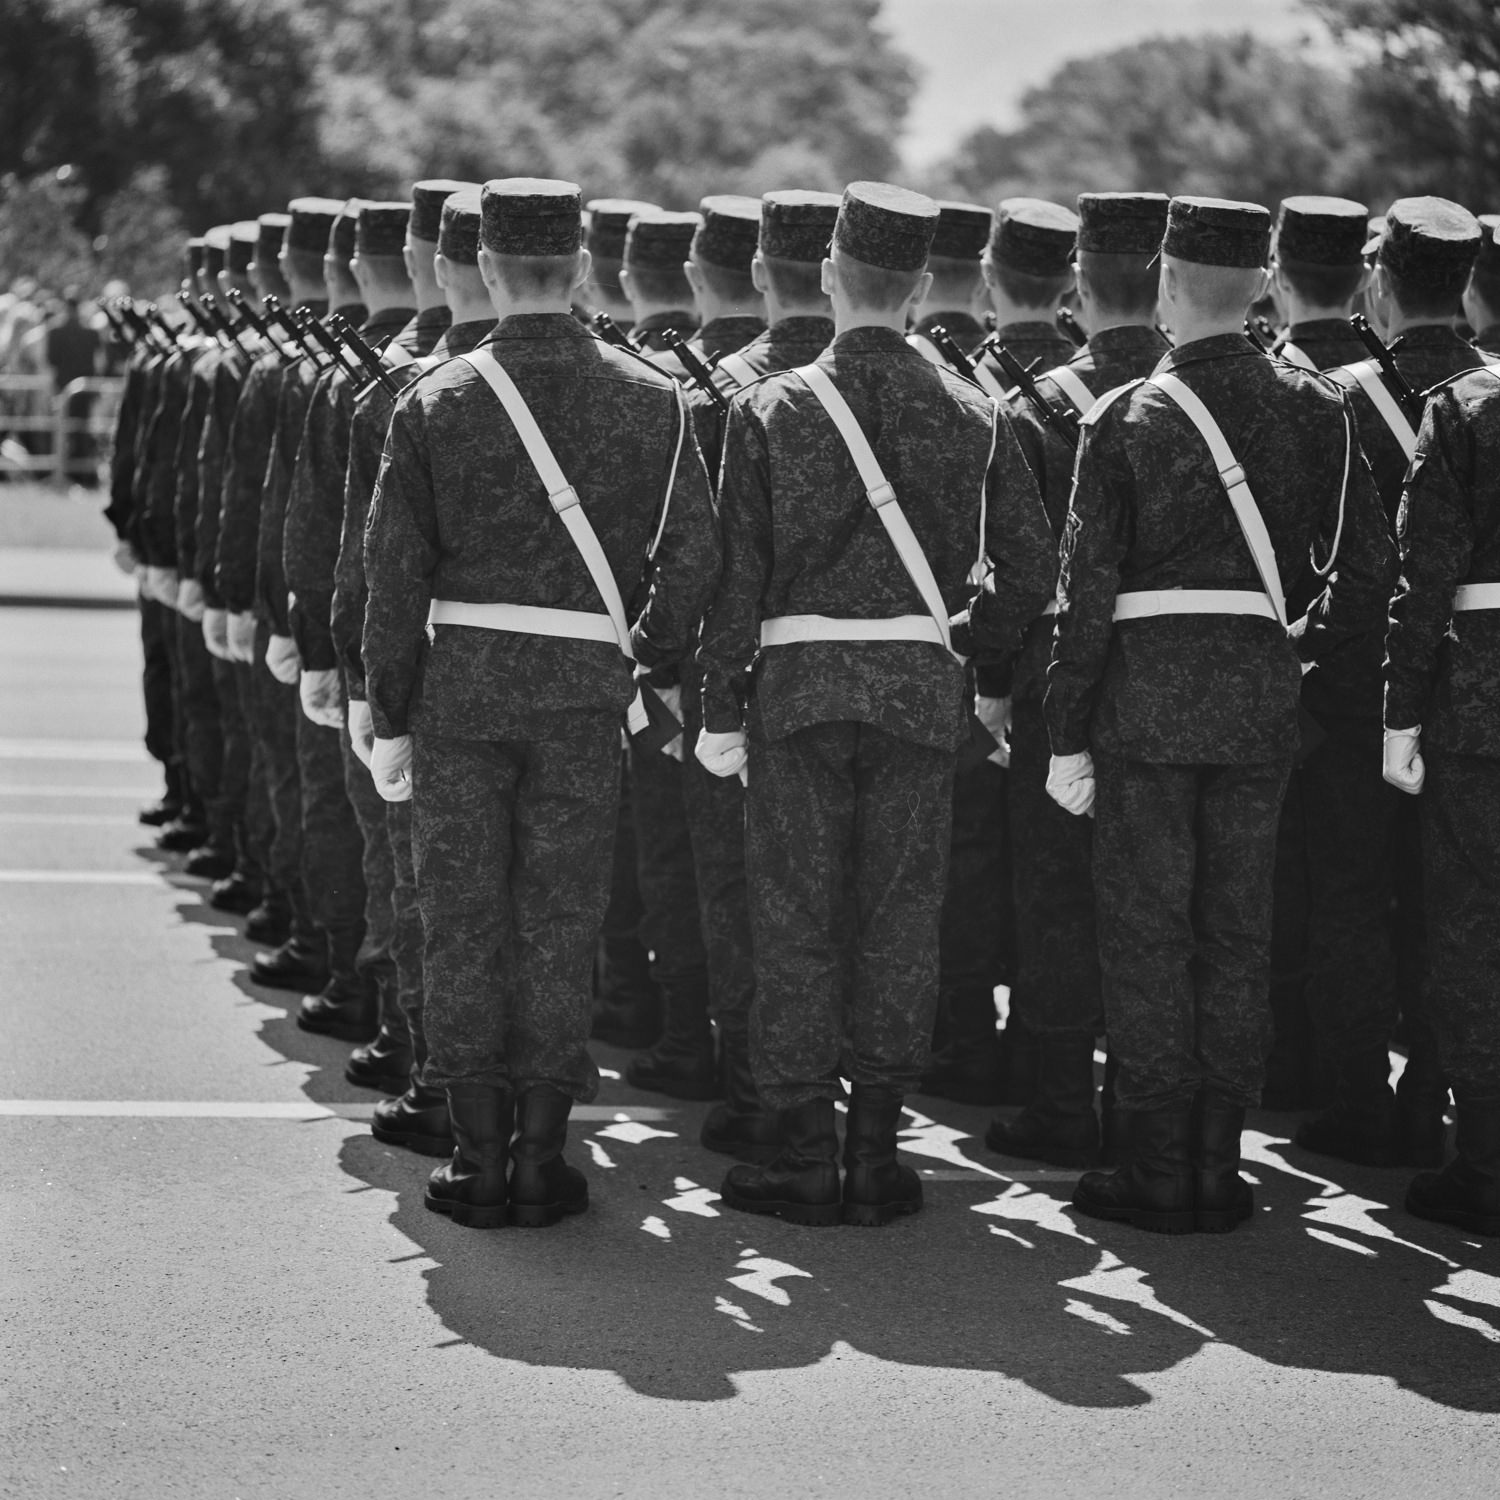 Strict rows of soldiers lined up on the avenue on the Independence Day of the Republic of Belarus